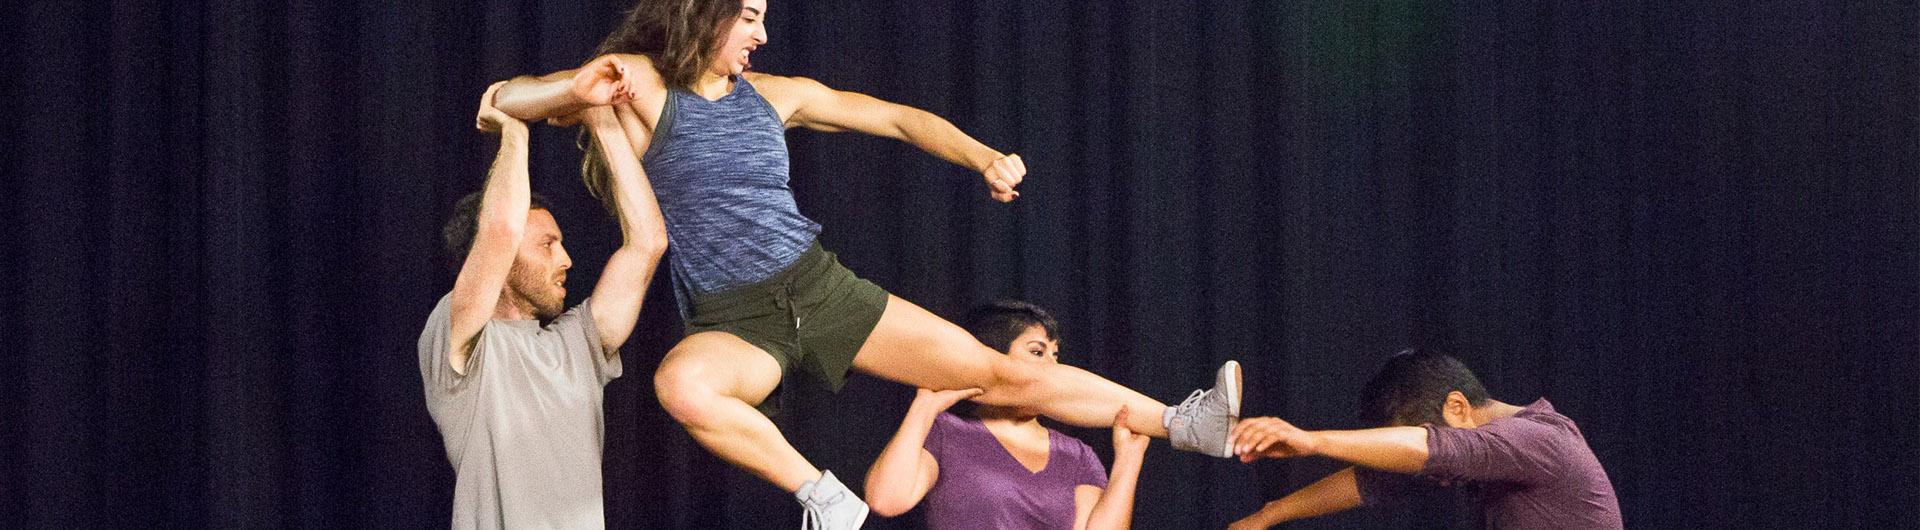 Theater students learn how to kick, punch and fall down in stage combat classes.